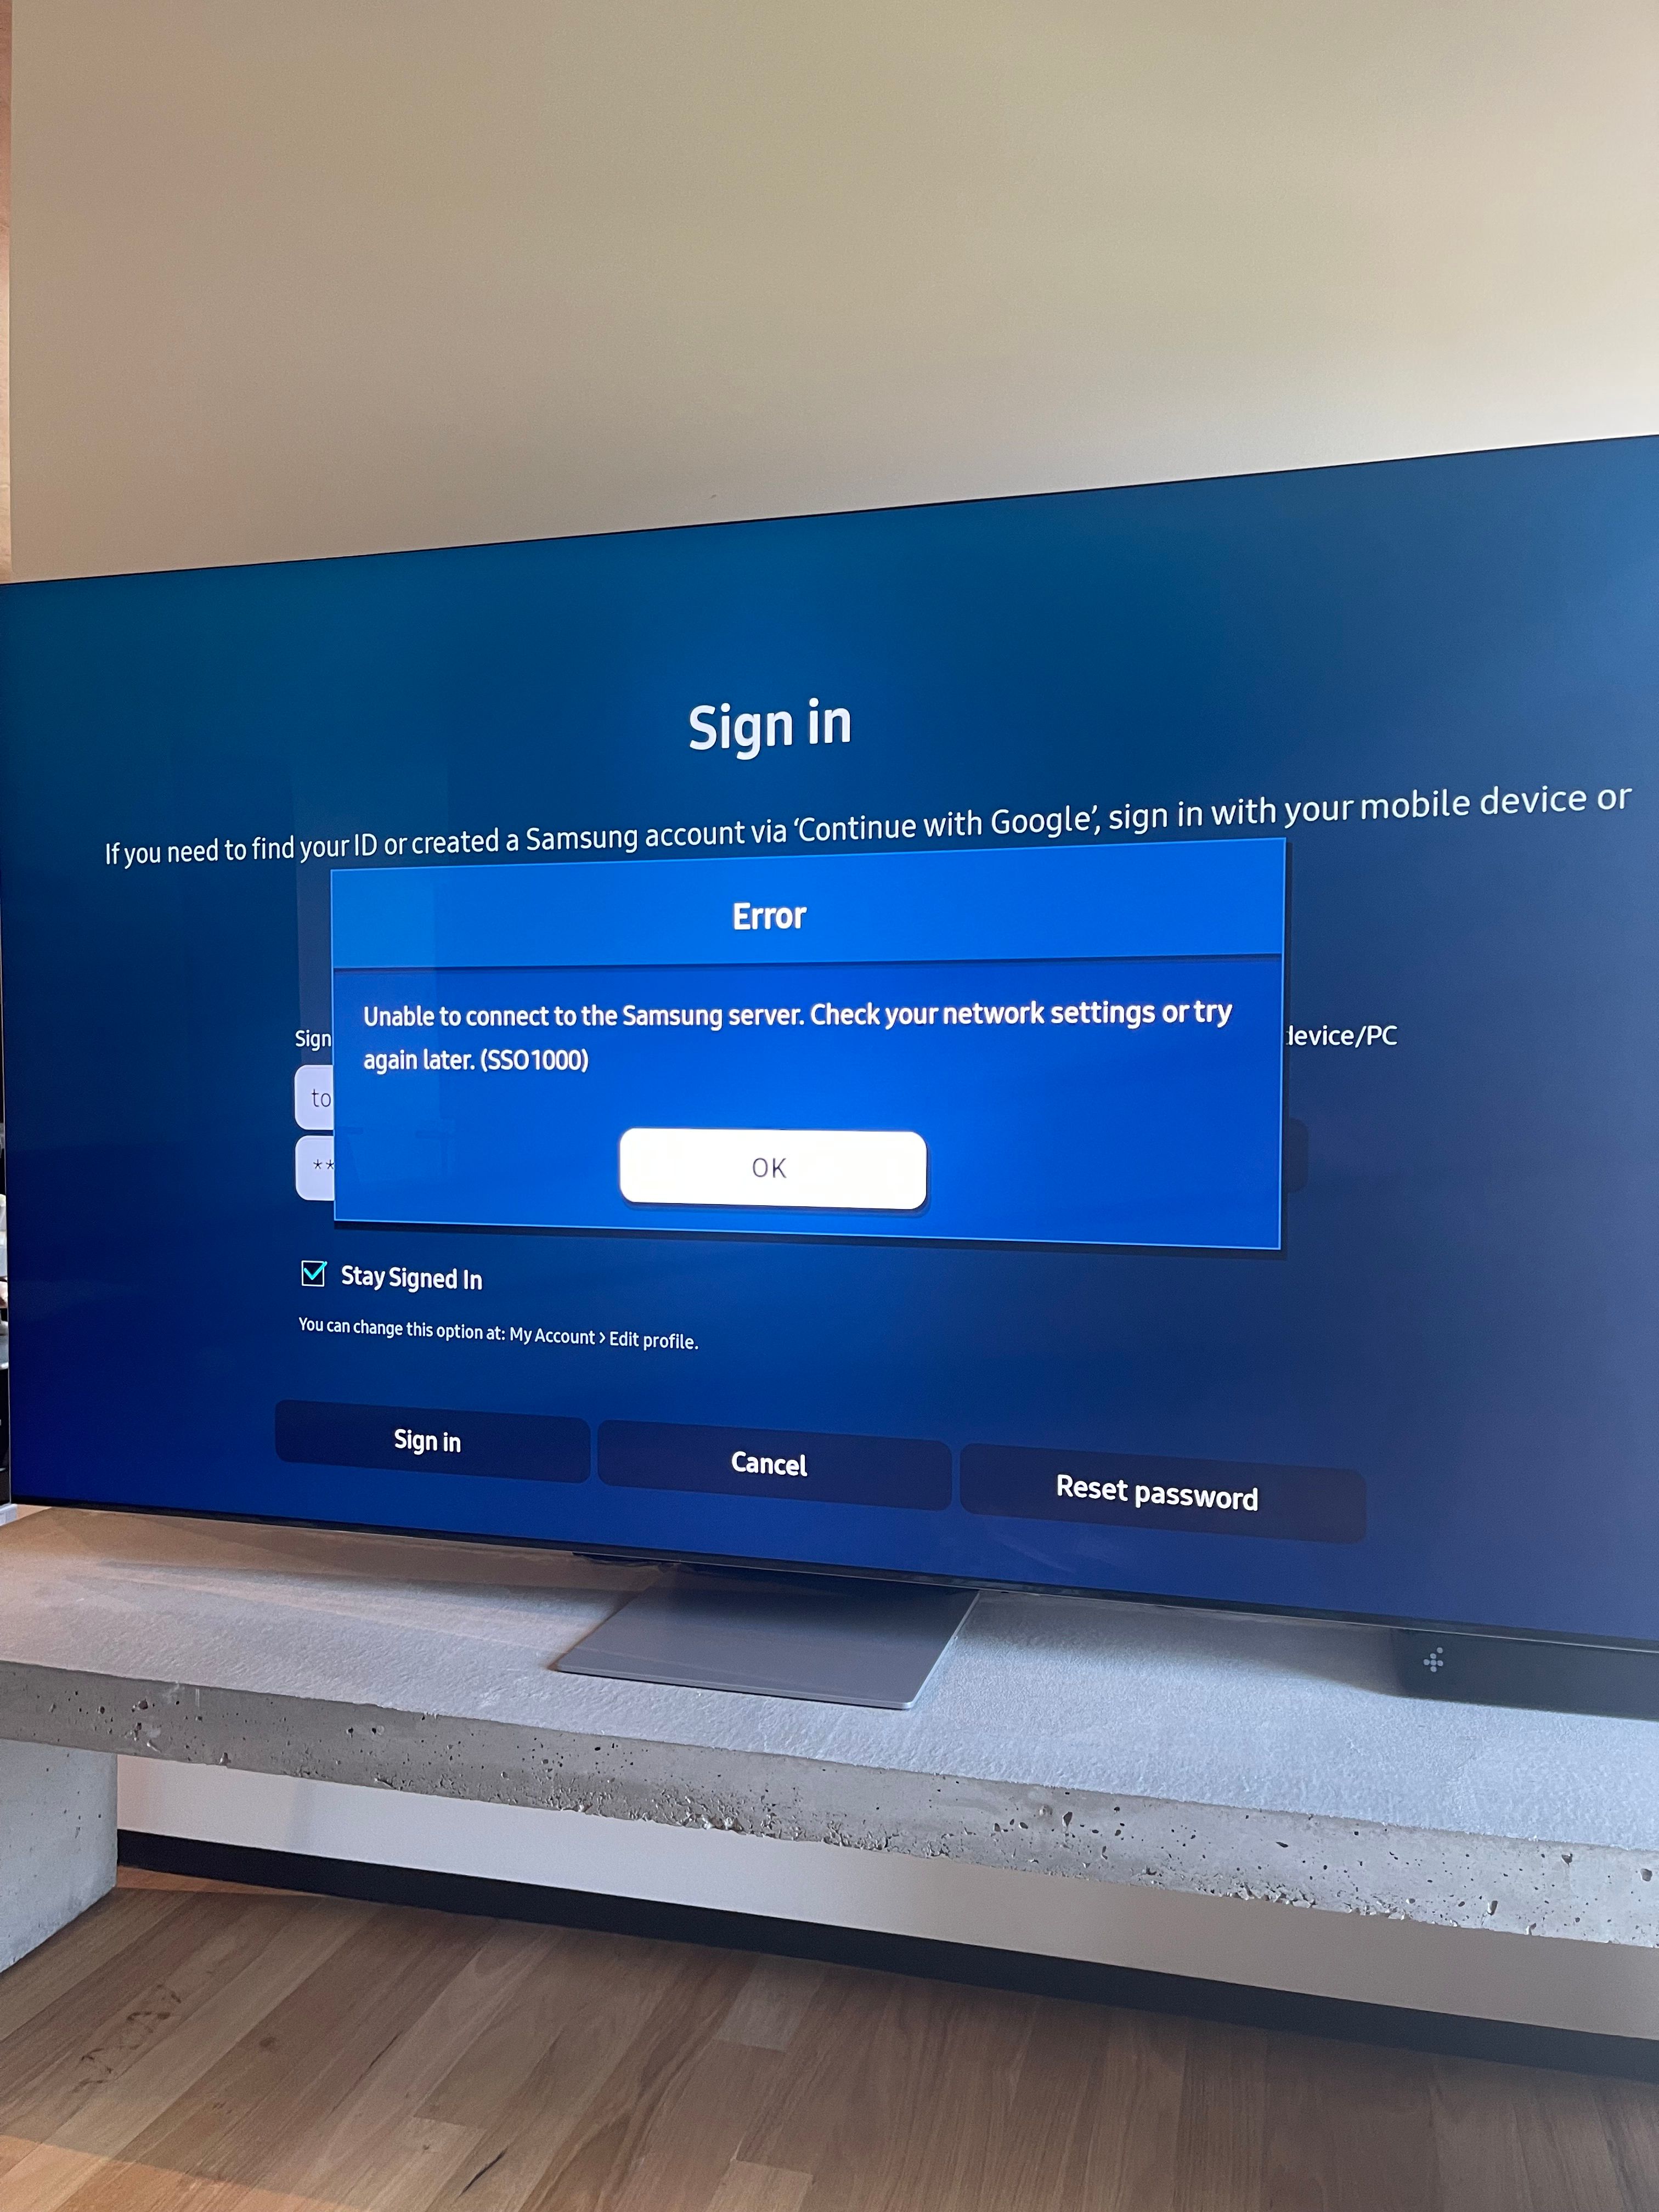 85 QN900A Neo QLED - Err4001 and SSO1000 - Samsung Members